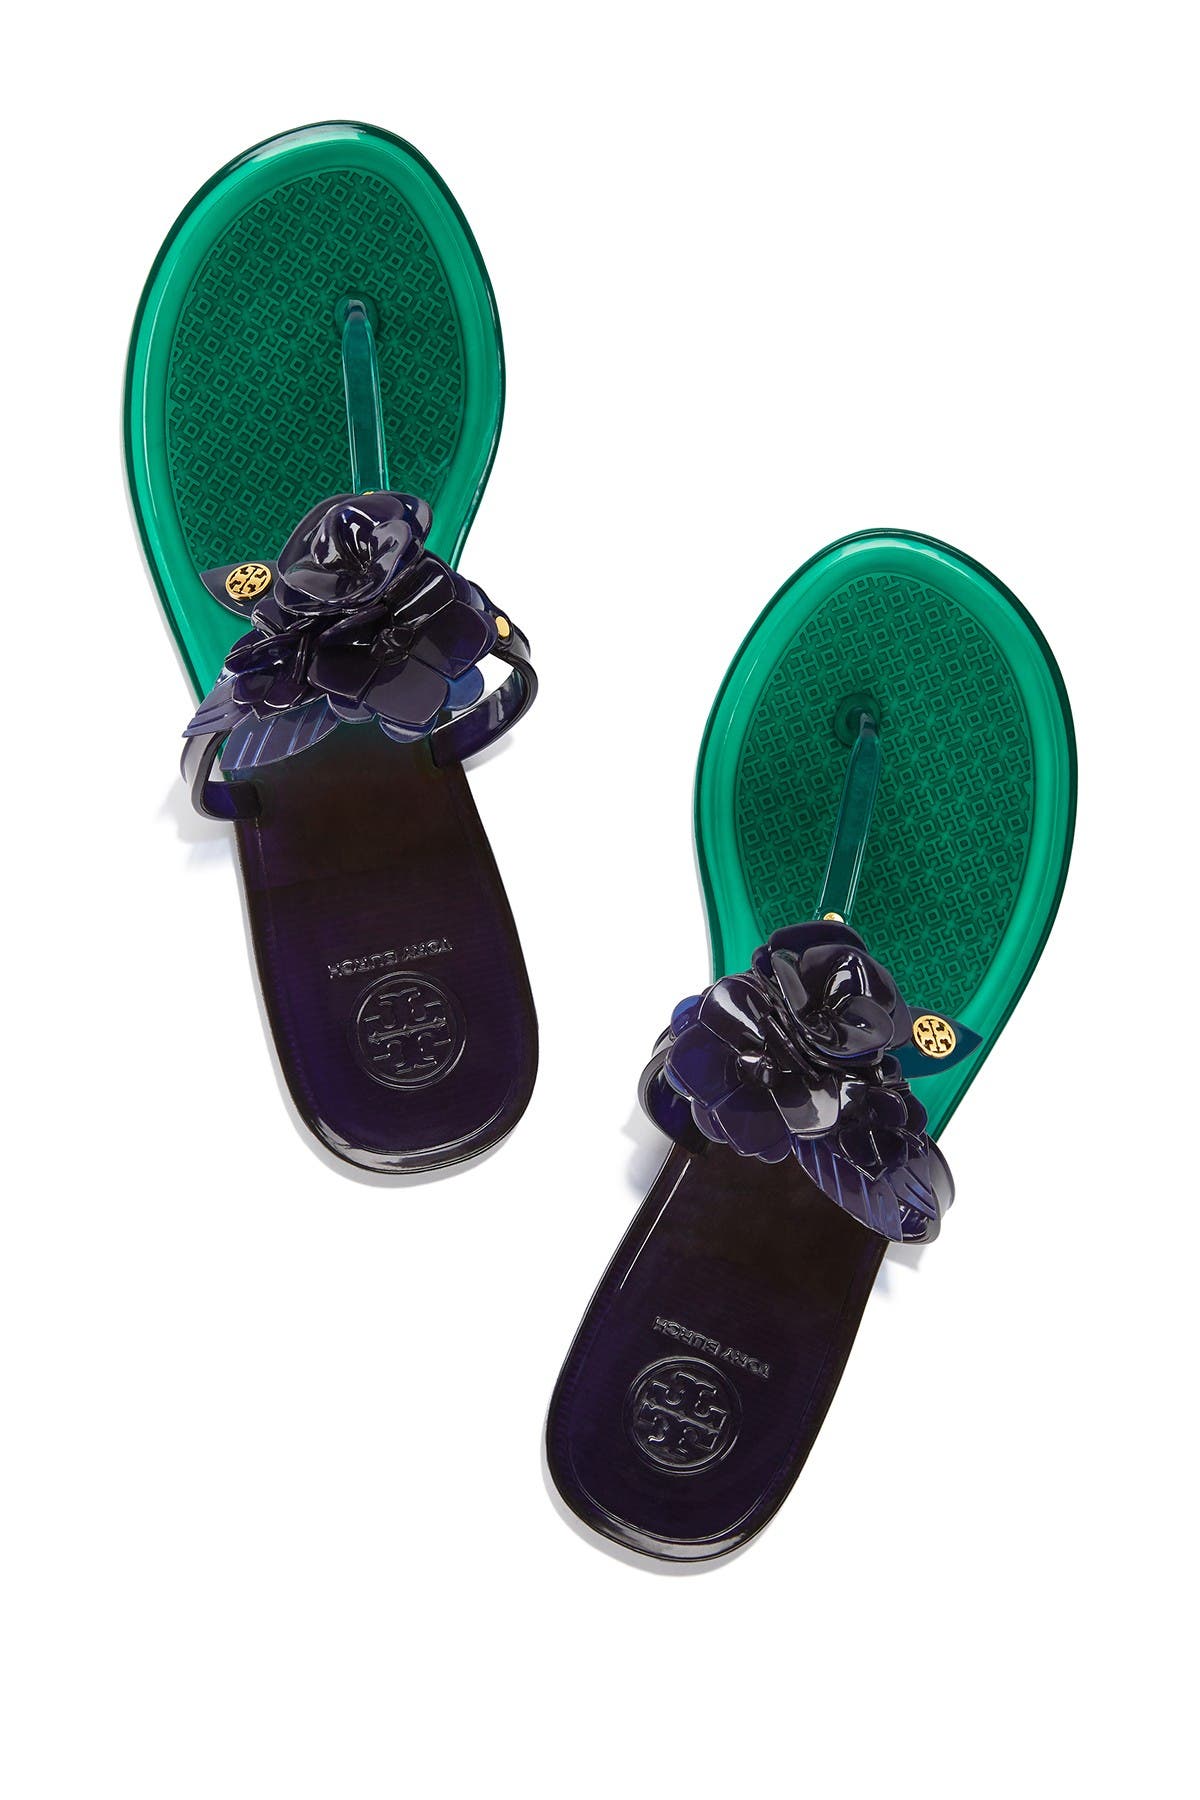 tory burch blossom jelly sandals